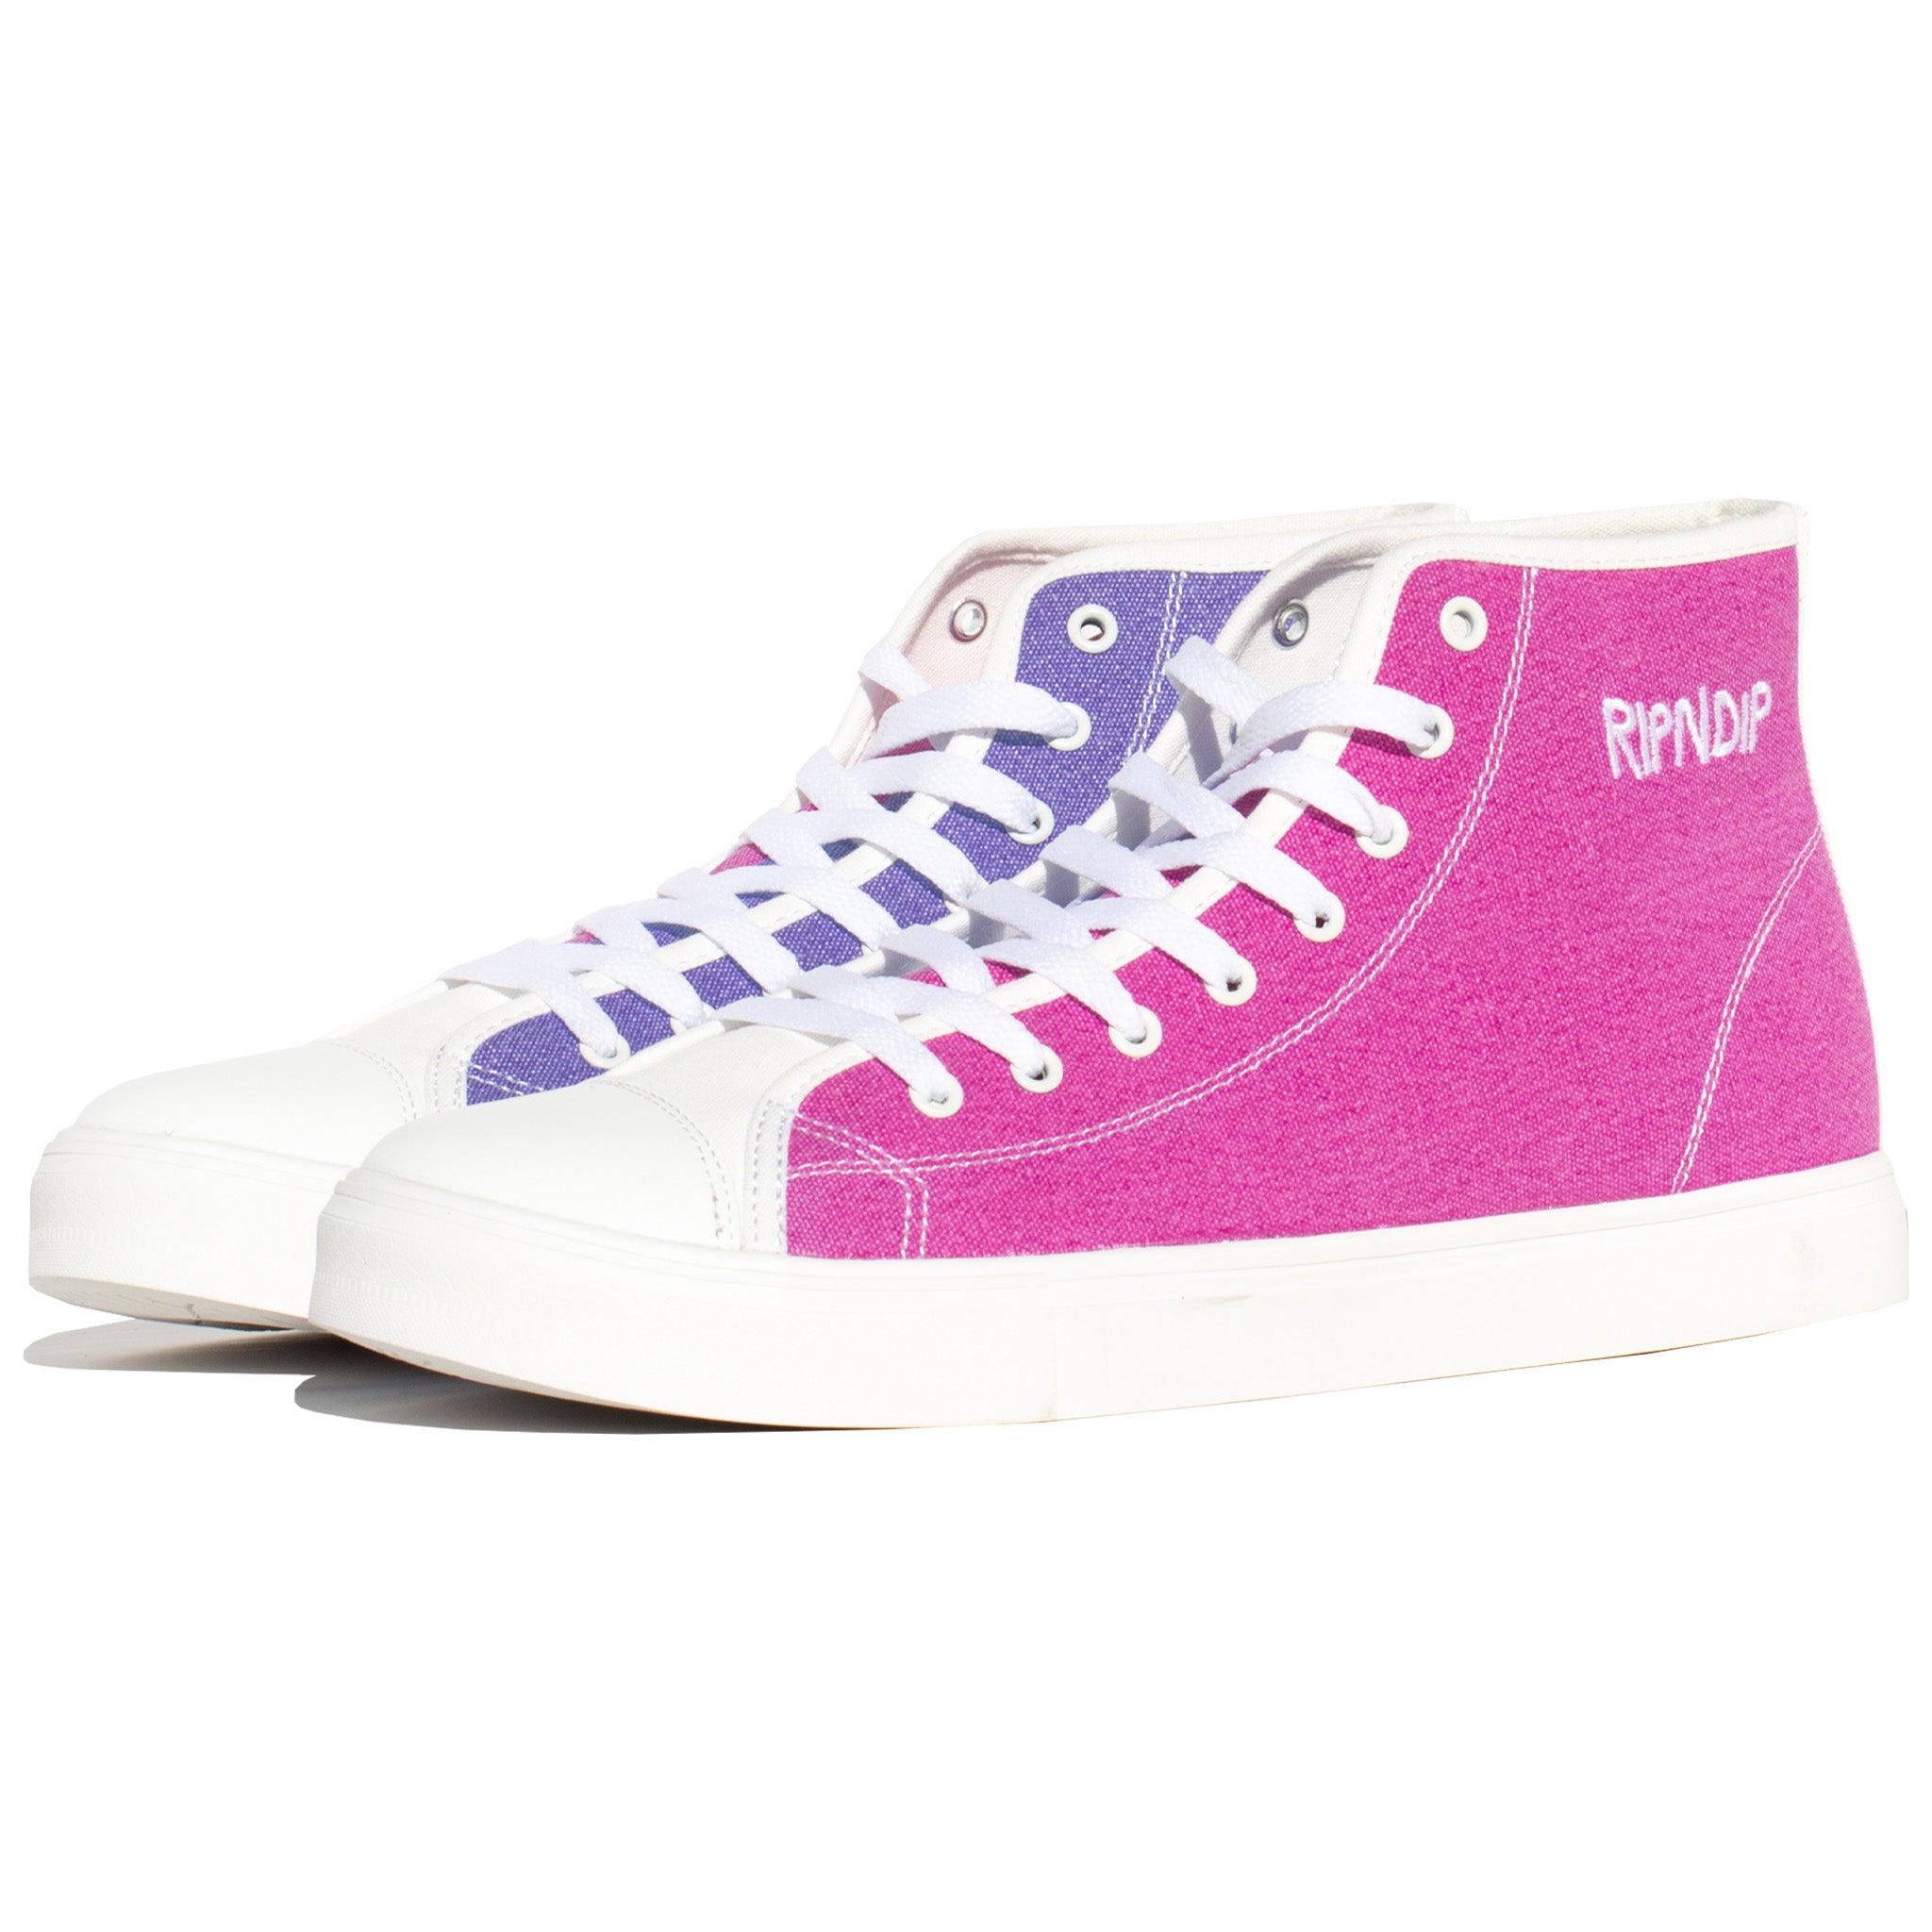 Lord Nermal UV Activated High Tops (Blue/Fuschia)